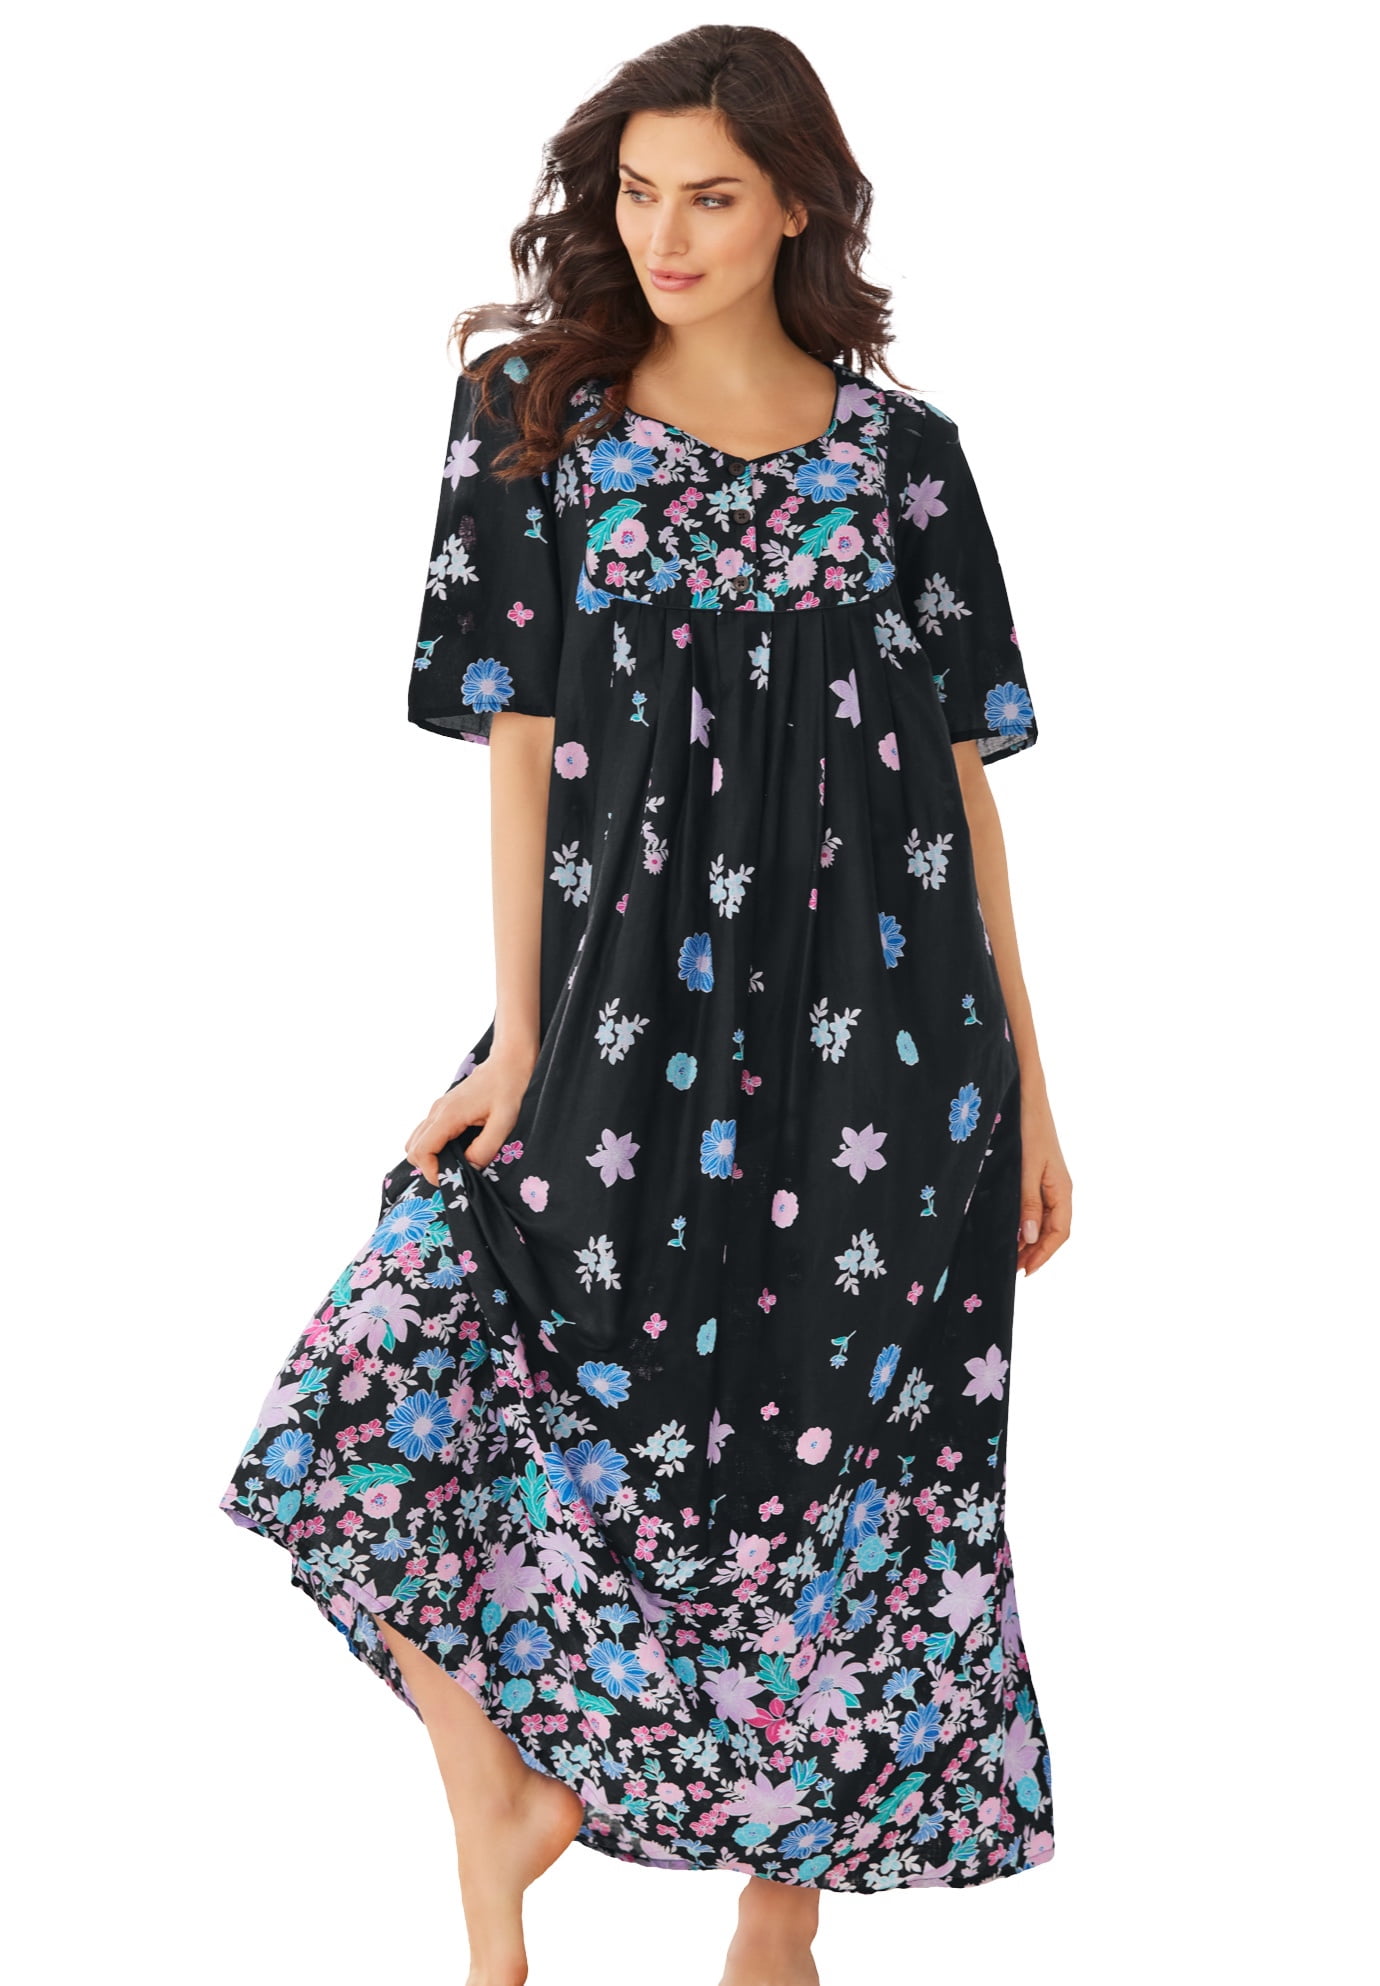 Only Necessities Women's Plus Size Petite Bib Front Dress or Nightgown ...